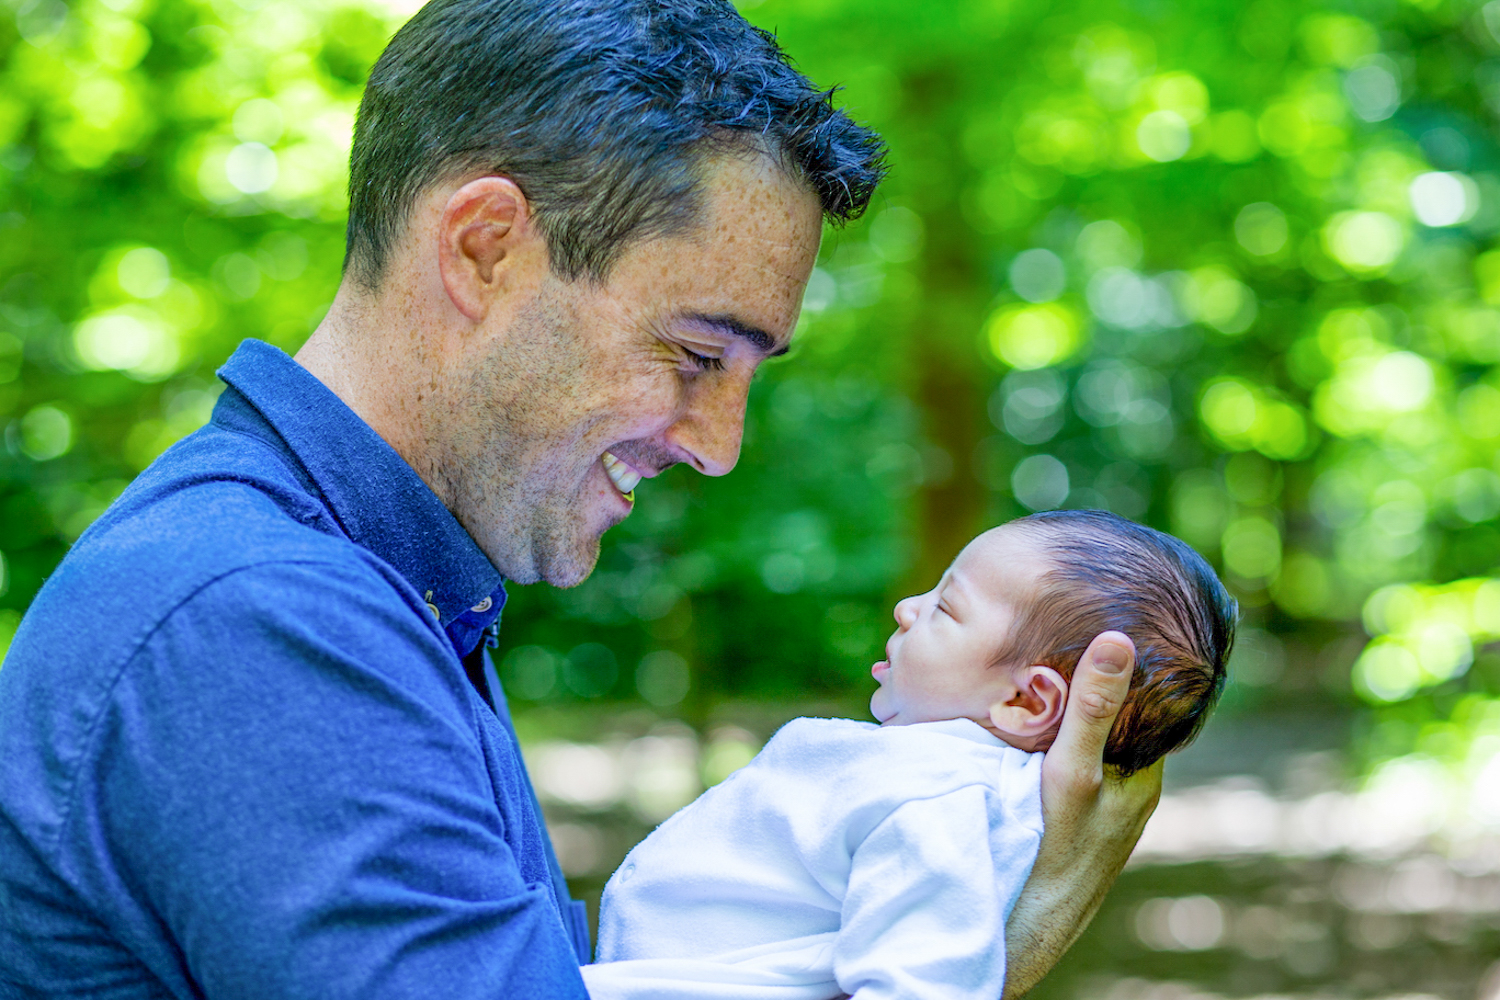 Man in blue shirt gazing at new born baby in the garden